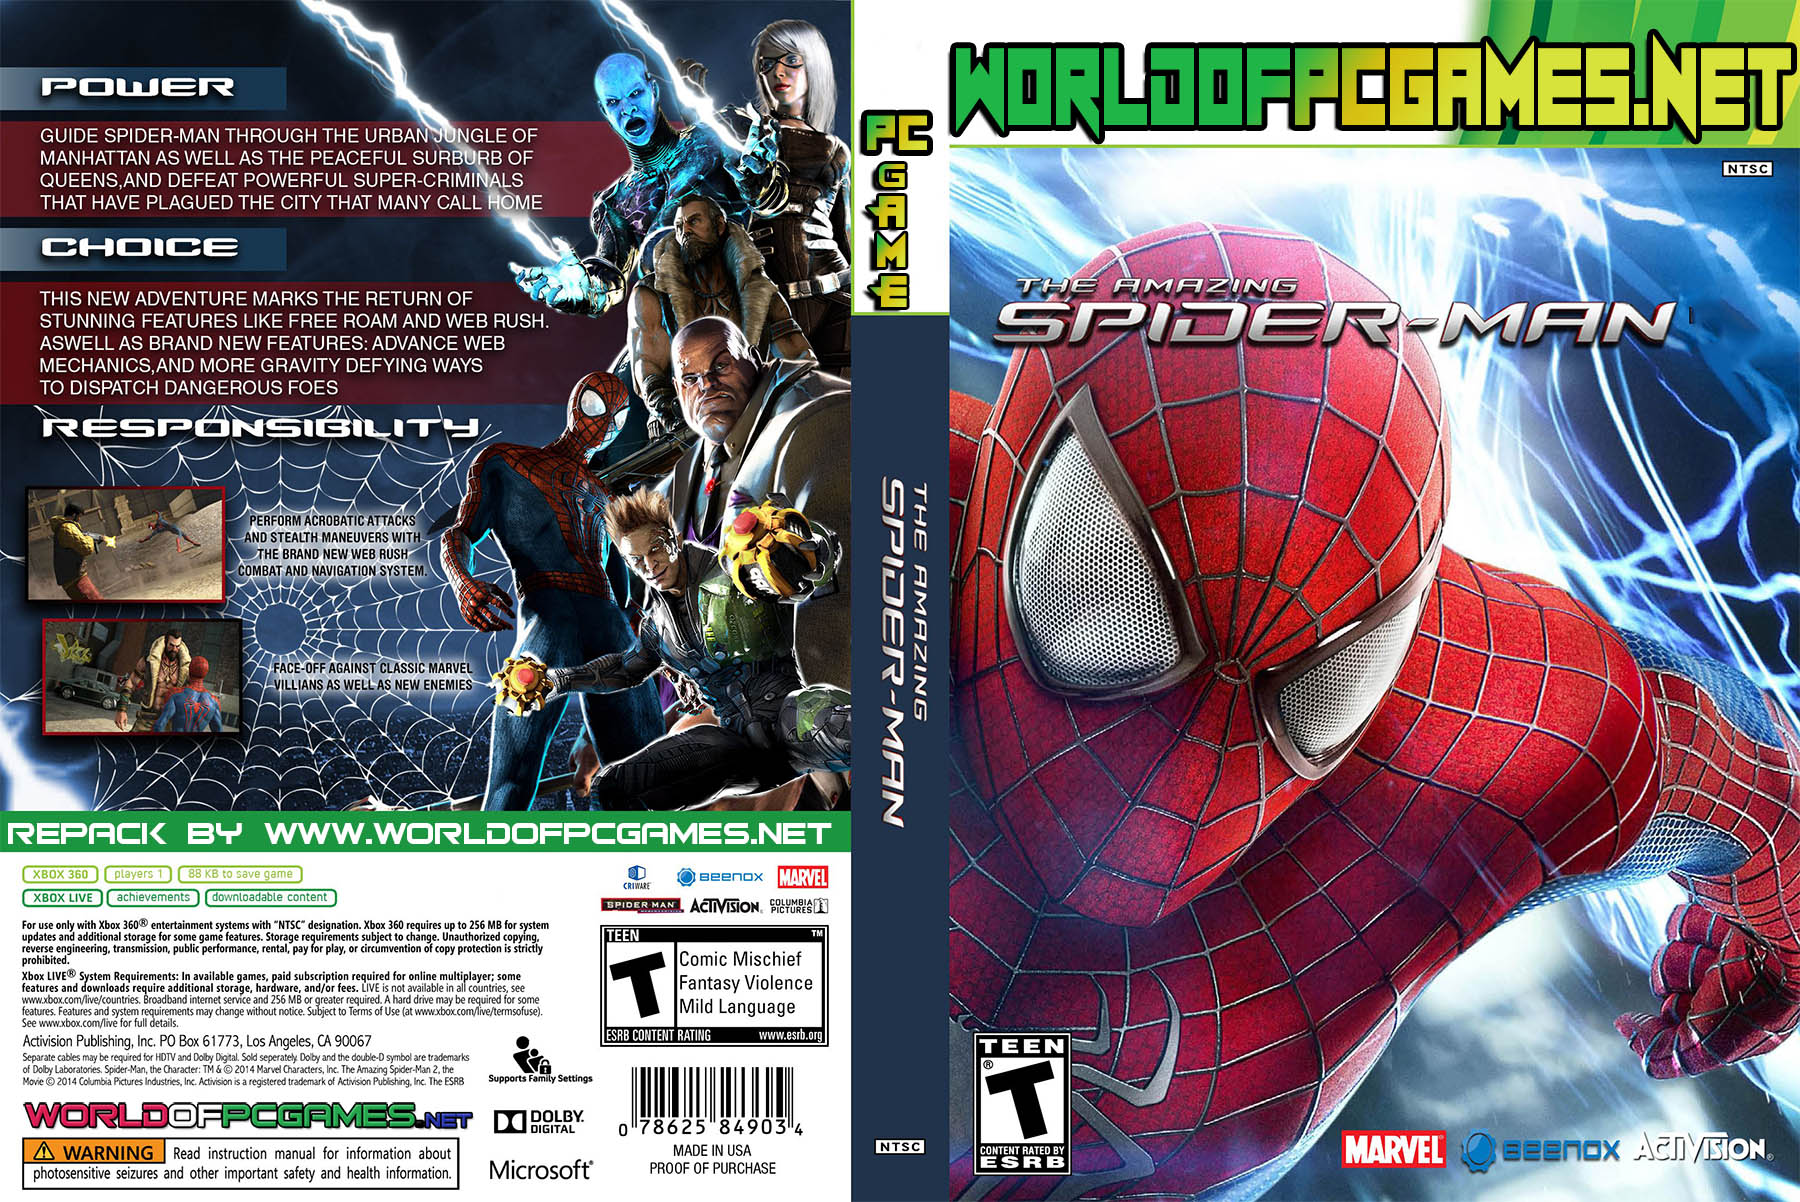 The Amazing Spider Man Free Download PC Game Full Version